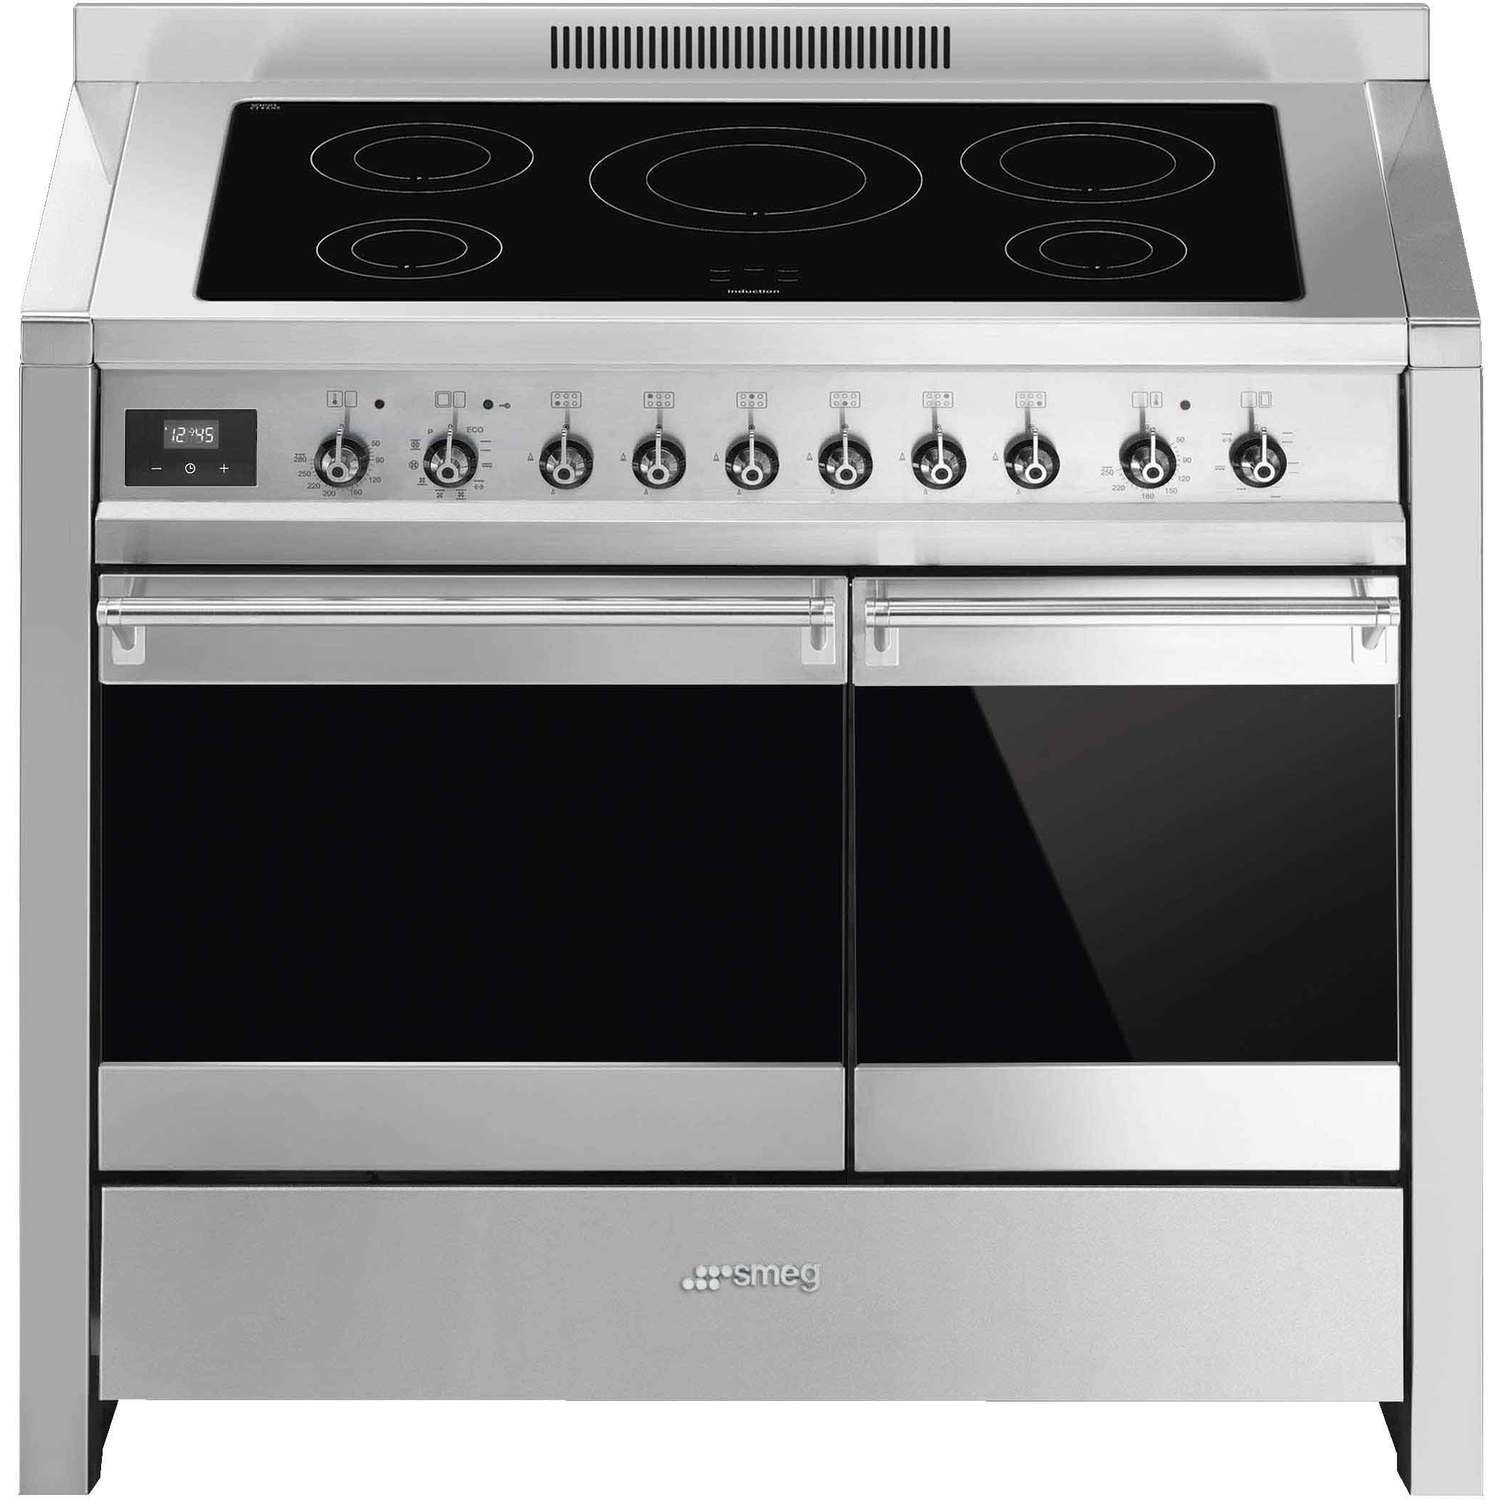 Smeg Opera 100cm Electric Range Cooker with Induction Hob - Stainless Steel